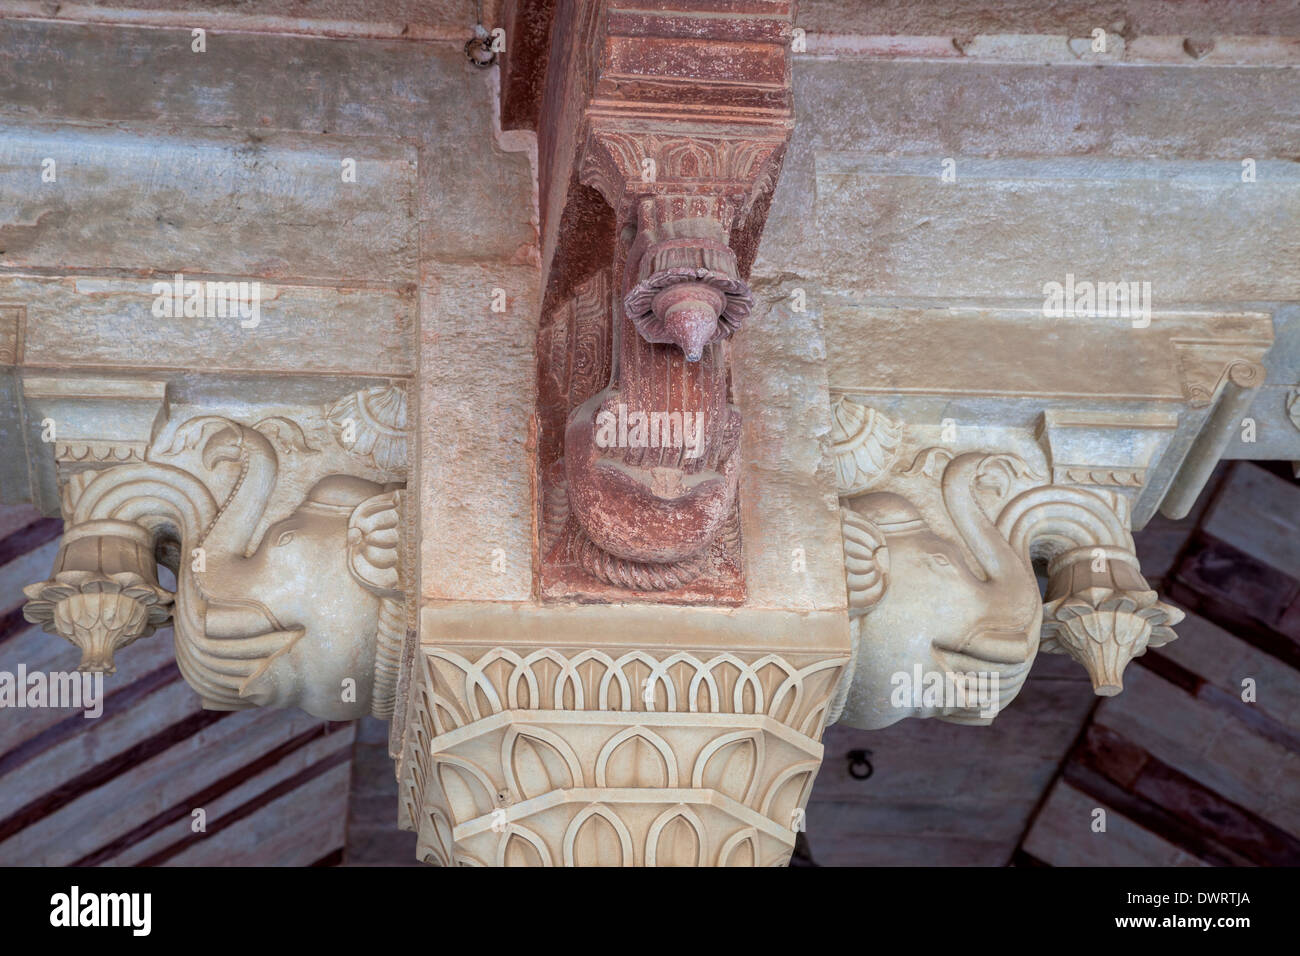 Jaipur, Rajasthan, India. Hindu Motifs on Columns of Diwan-i-Am, the Hall of Public Audience--Elephant Holding a Lotus Flower. Stock Photo